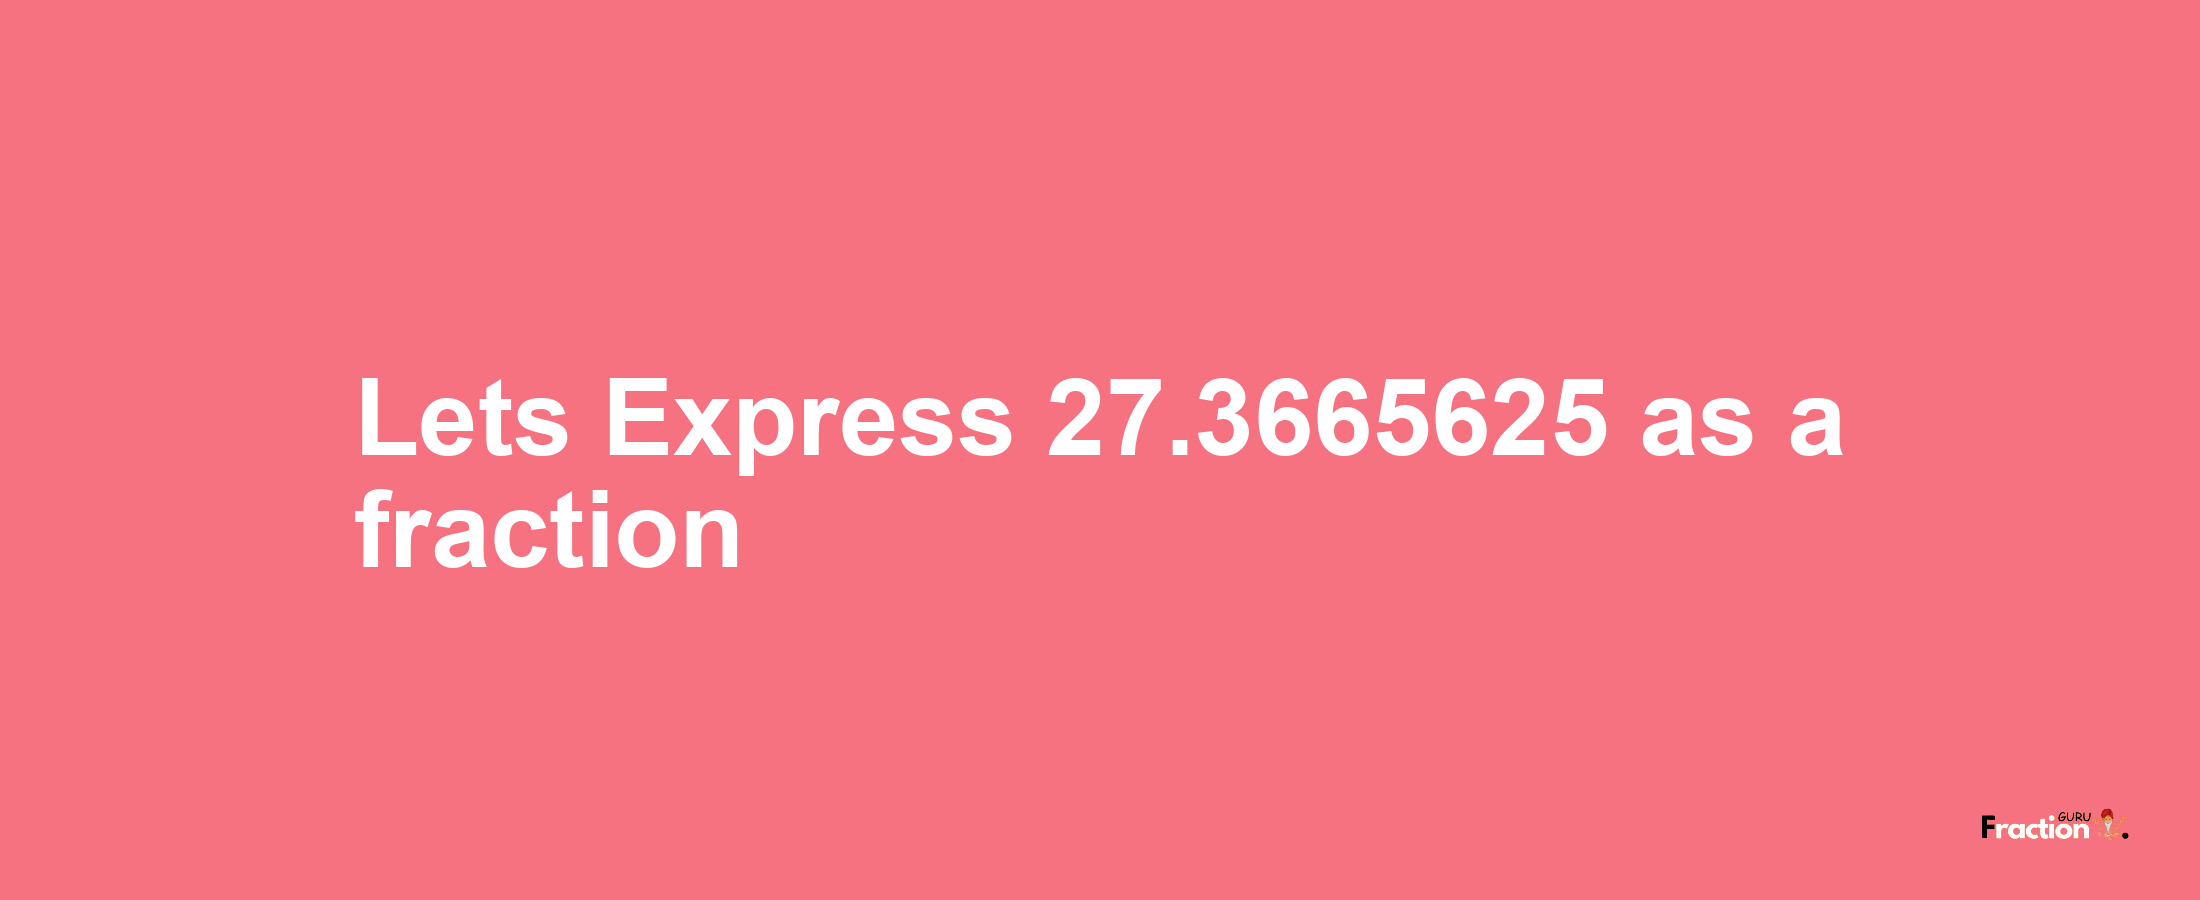 Lets Express 27.3665625 as afraction